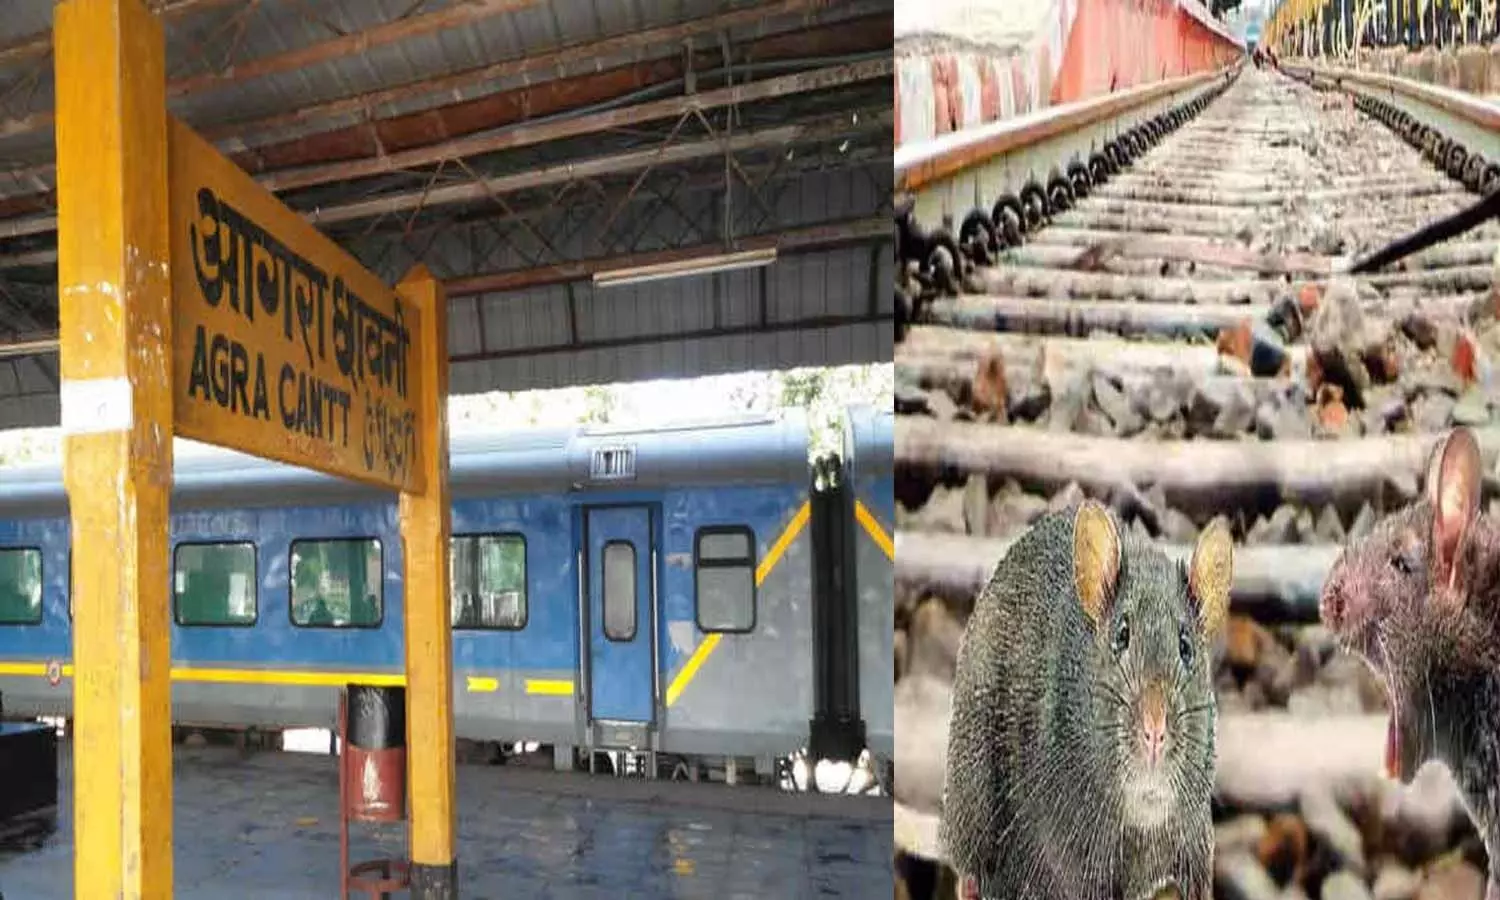 Railway upset due to the terror of rats, condition of catching rats kept in cleaning tender